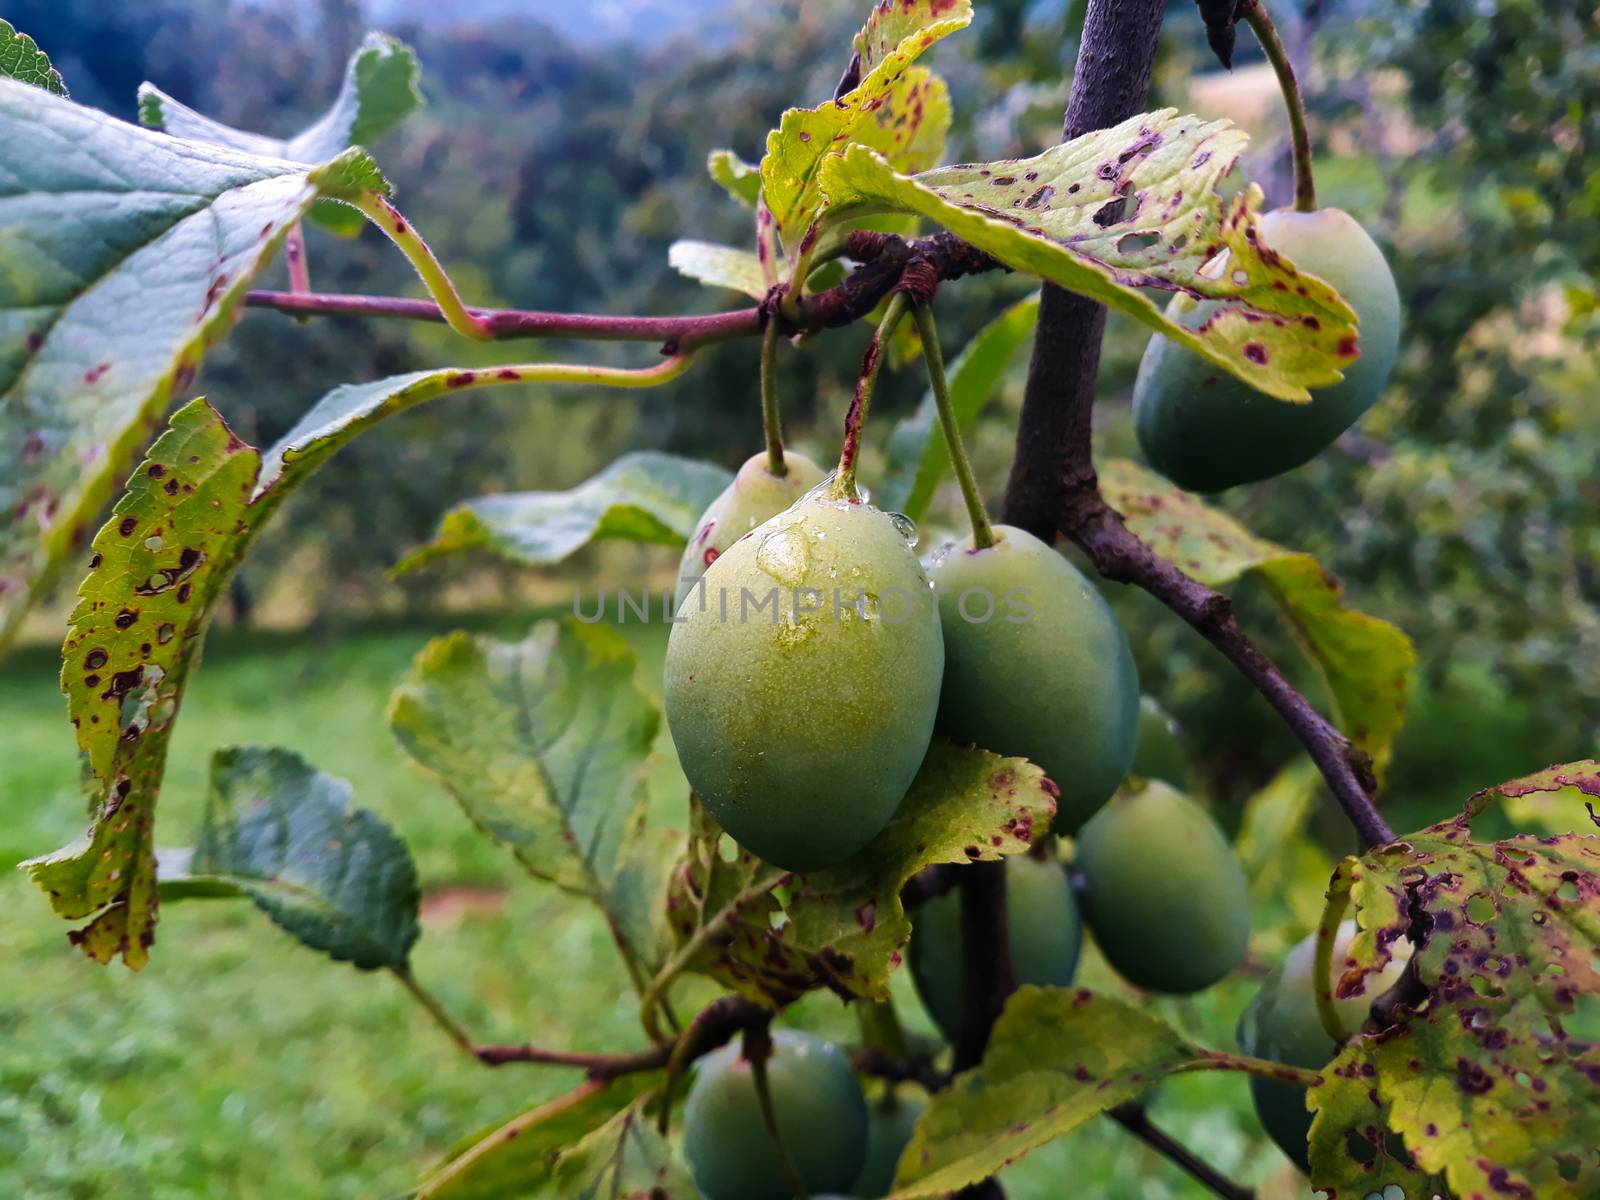 Close up of a group of plums on a branch after rain. Damaged leaves next to plums. Zavidovici, Bosnia and Herzegovina.